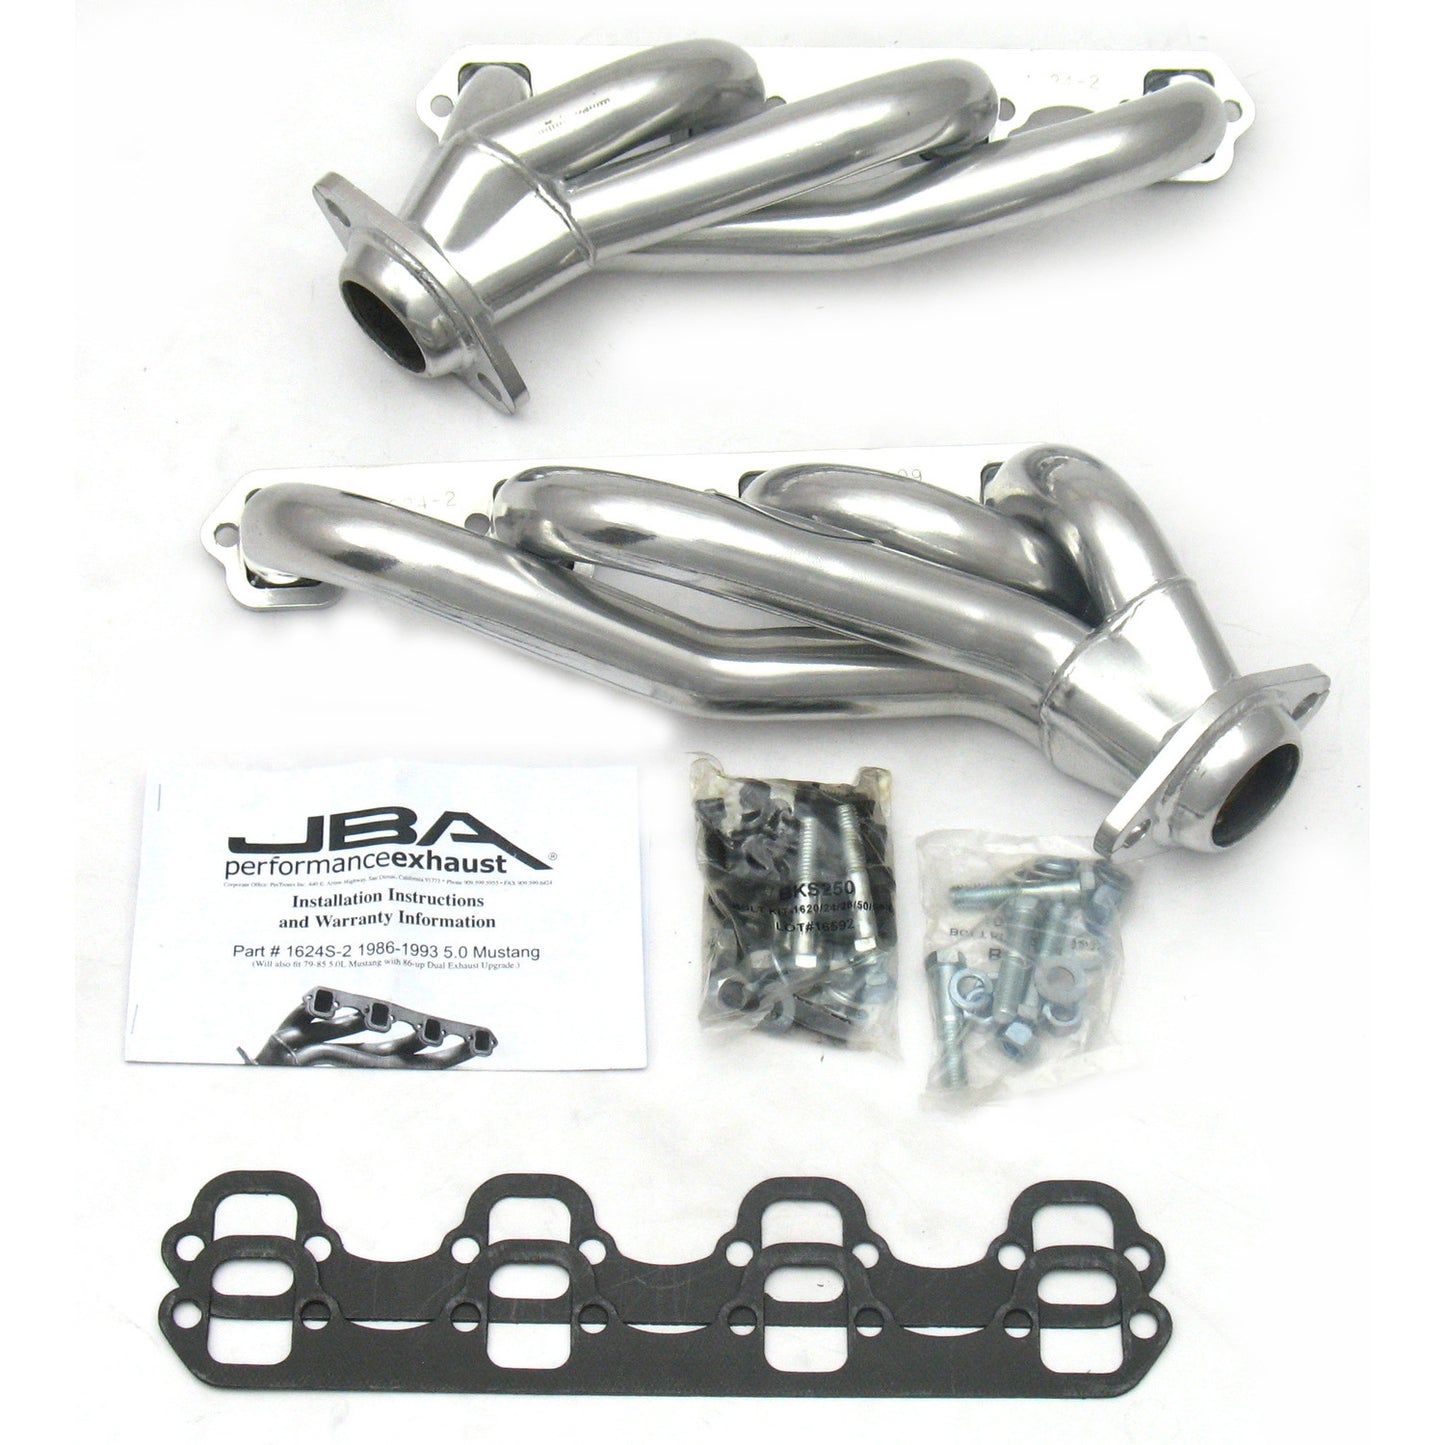 JBA Performance Exhaust 1624S-2JS 1 5/8" Header Shorty Stainless Steel 86-93 Mustang 5.0L Silver Ceramic